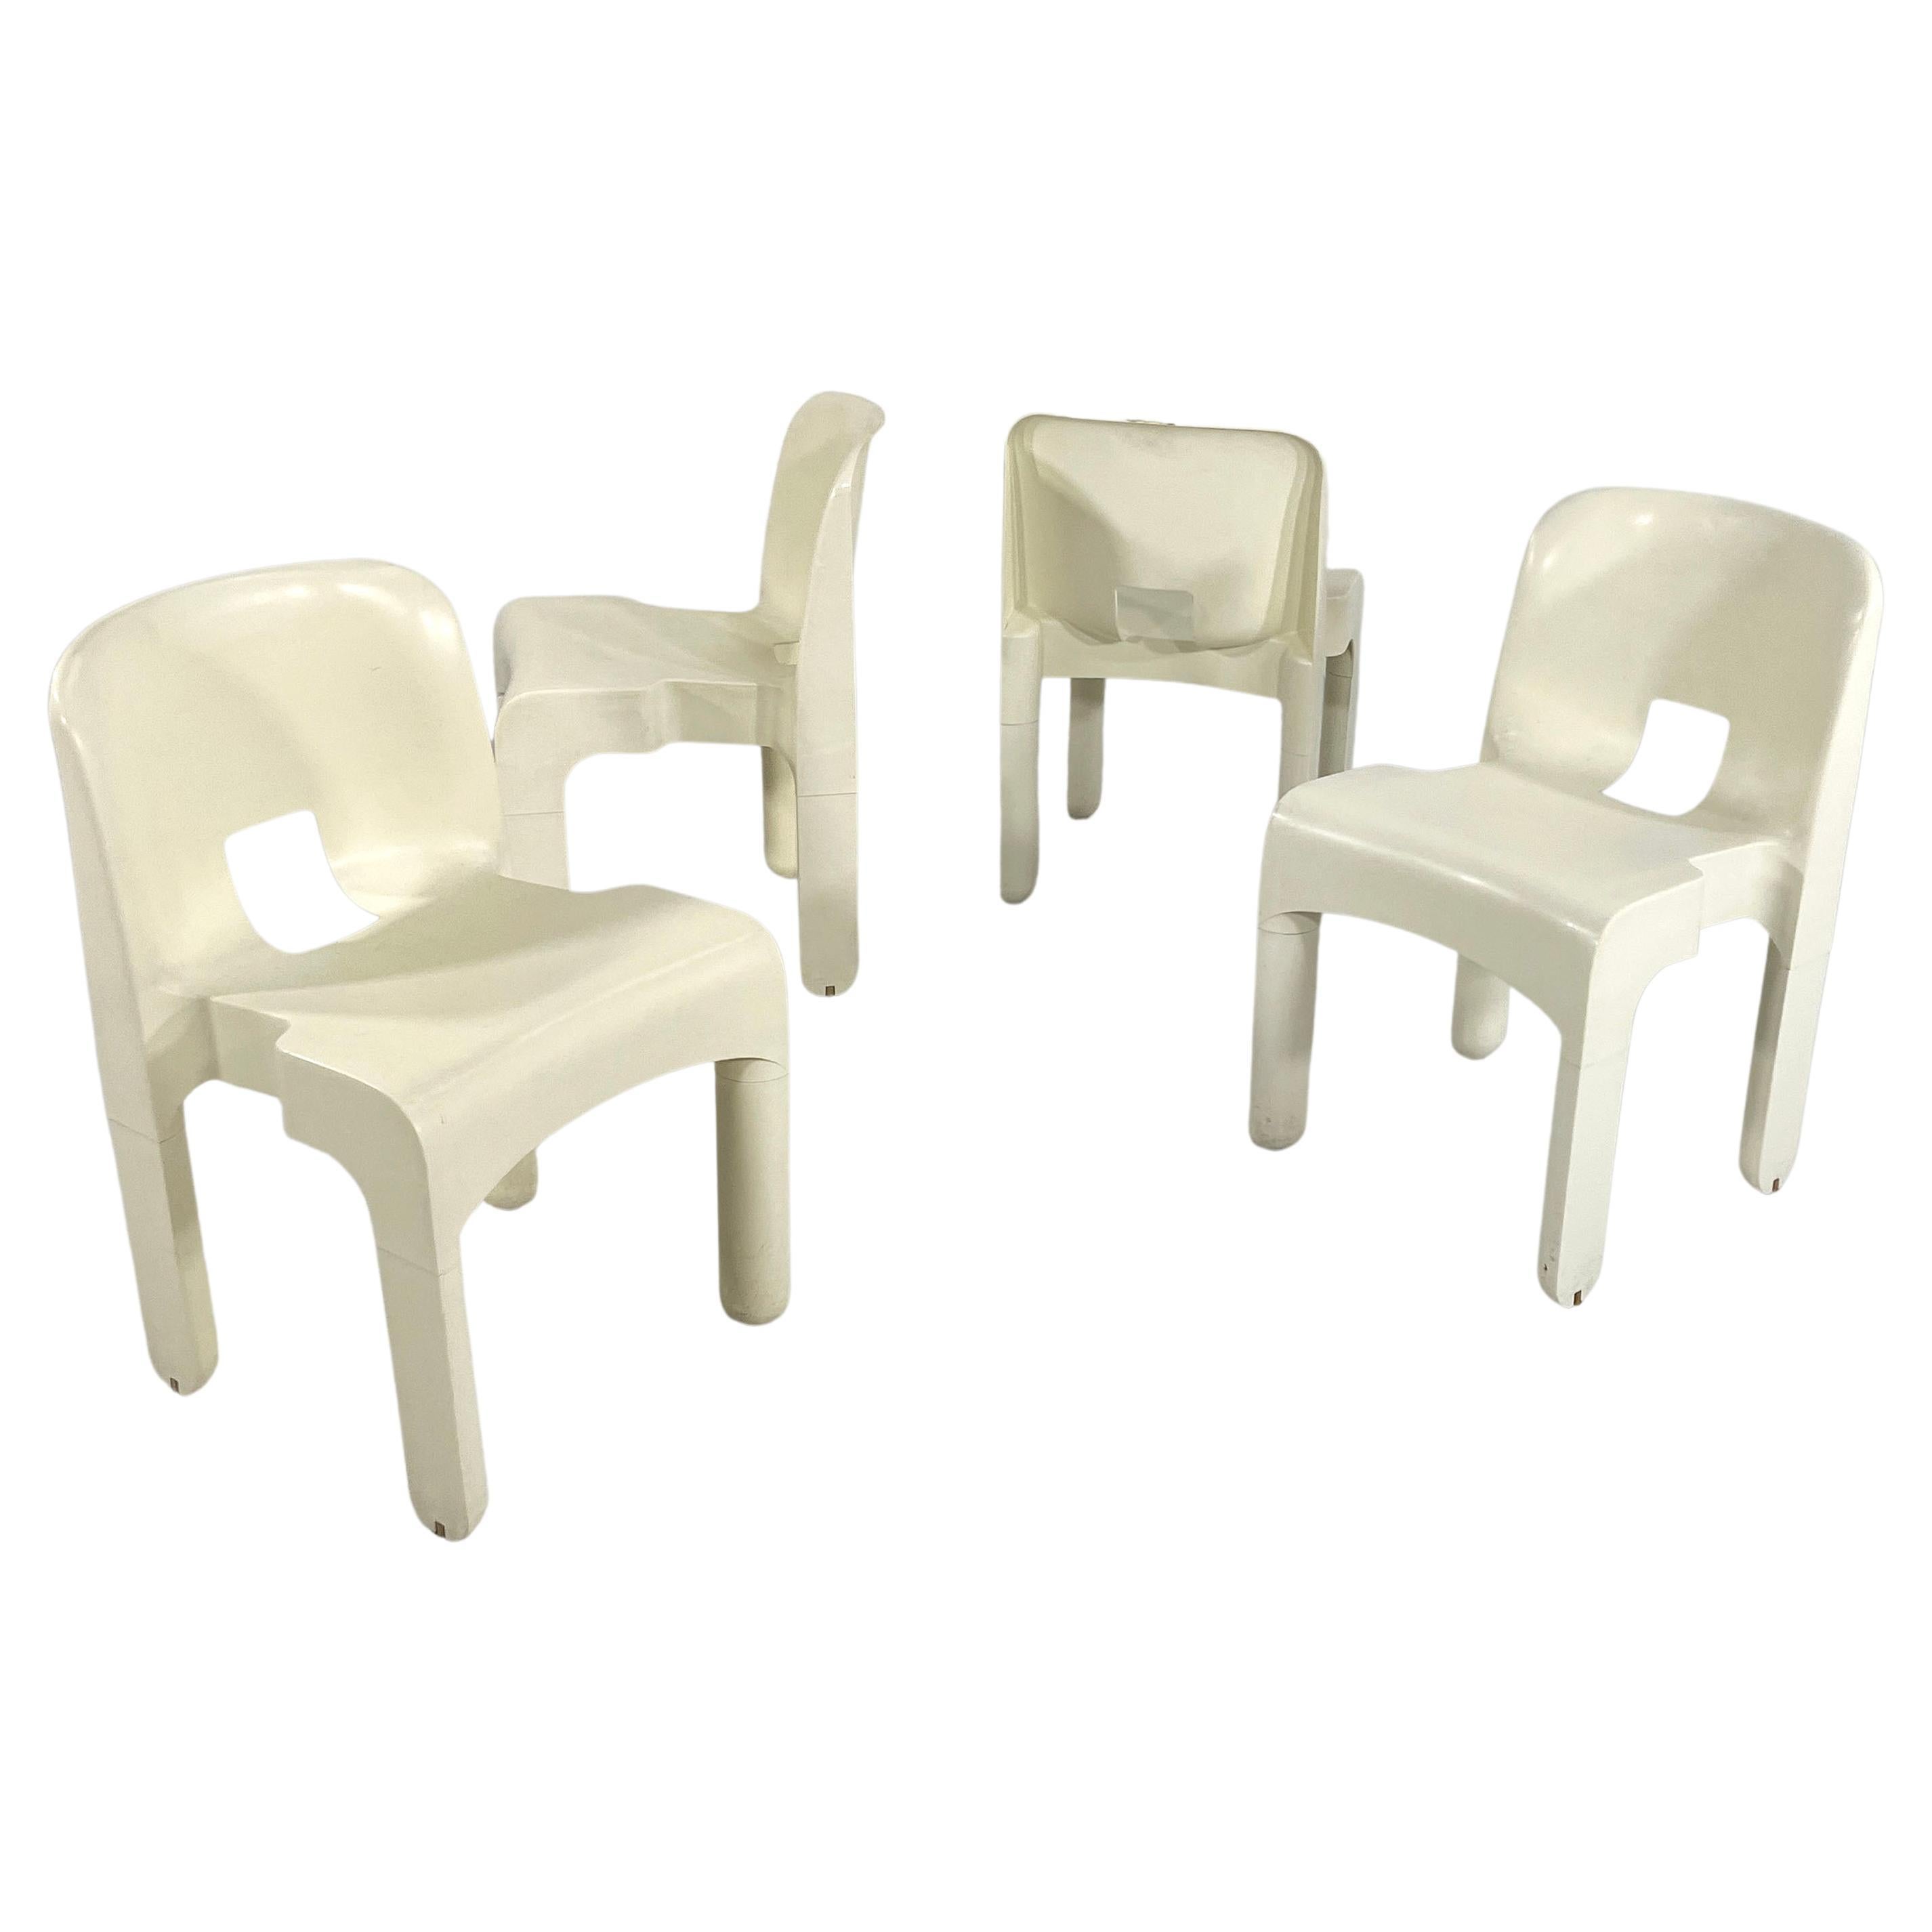 White Model 4867 Universale Chair by Joe Colombo for Kartell, 1970s